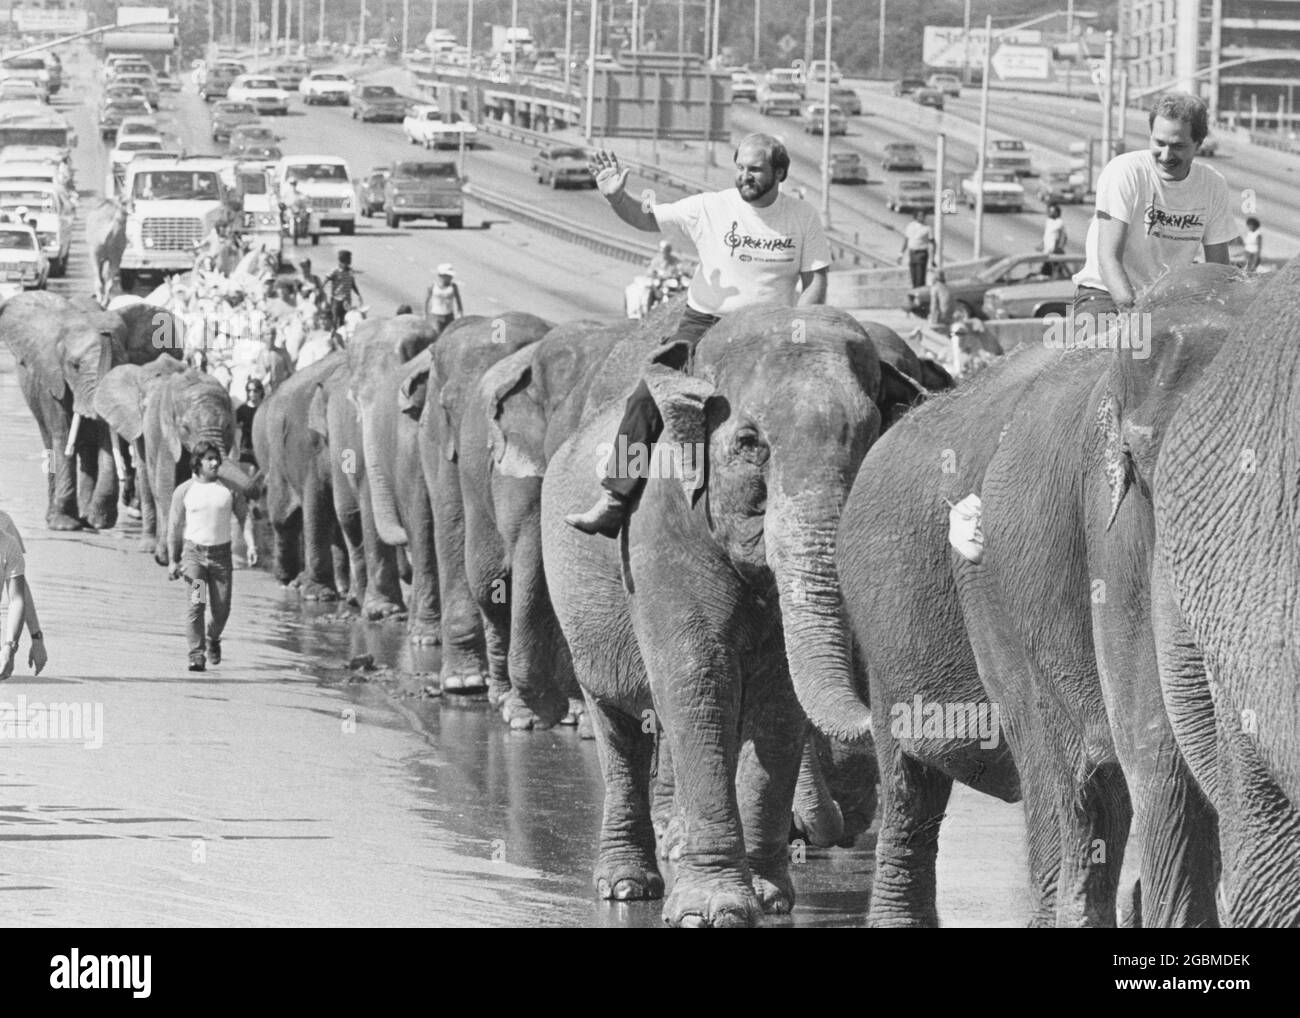 Austin Texas USA, circa 1980: Ringling Bros. Barnum and Bailey Circus parade of elephants along Interstate 35 near downtown. The elephants disembarked from the circus train on tracks just south of downtown and walked north on the interstate access road to the Erwin Center where the circus had a multi-day run of performances. ©Bob Daemmrich Stock Photo